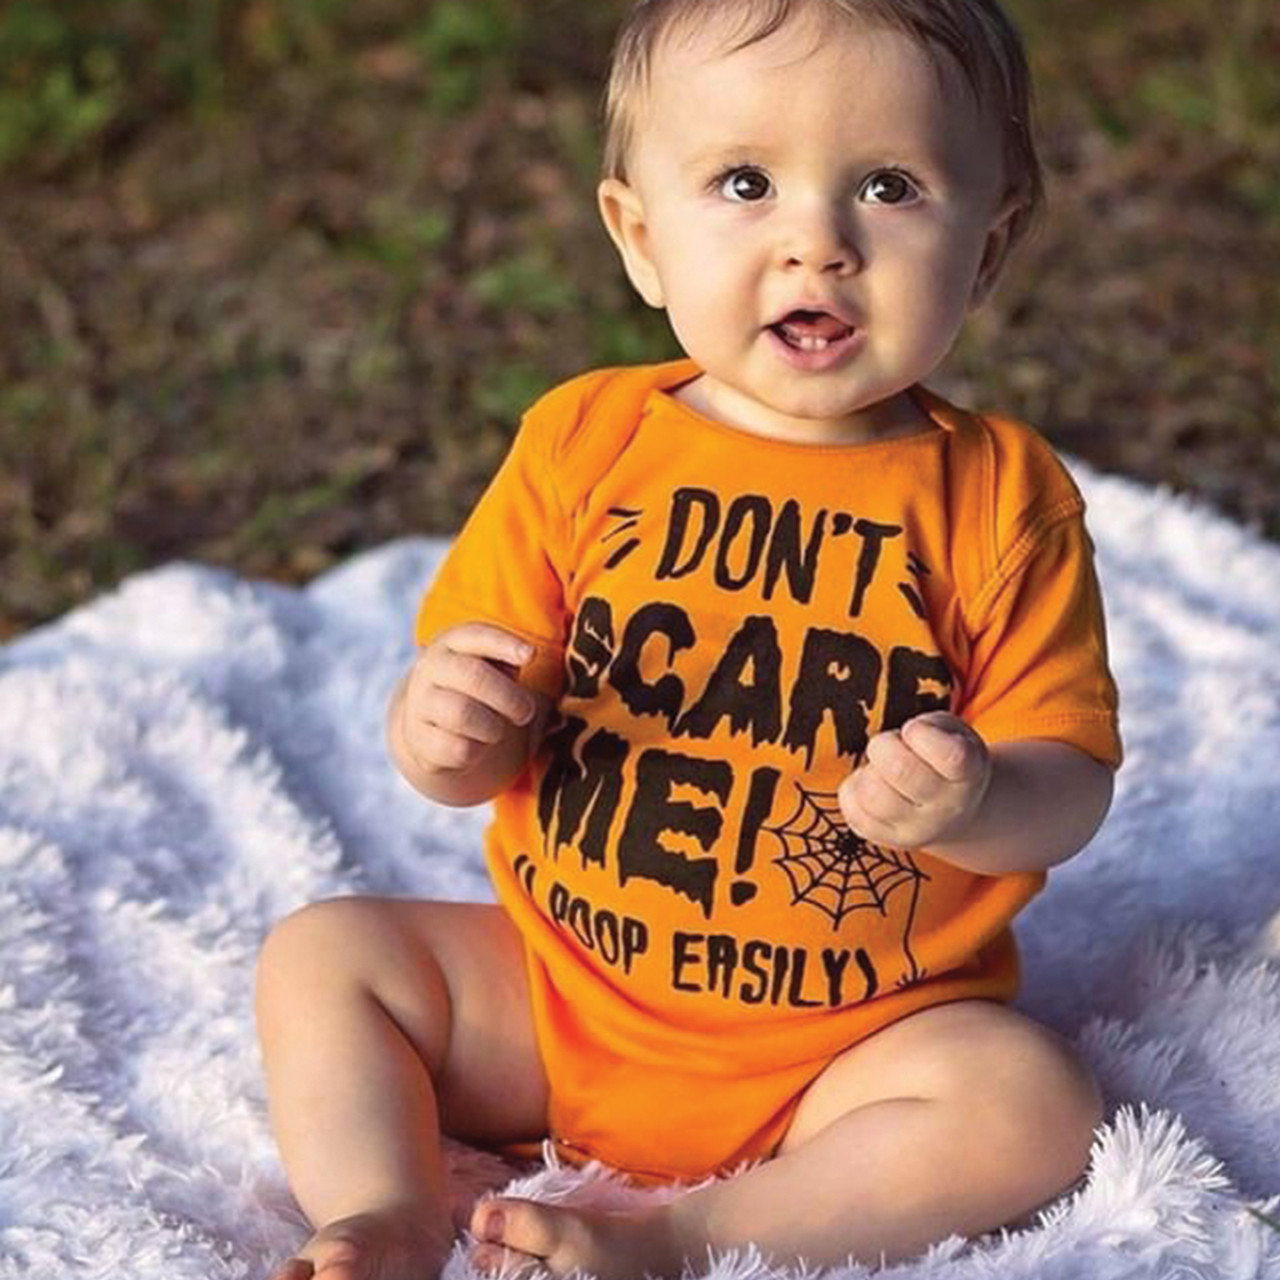 Don't Scare Me Baby Shirt